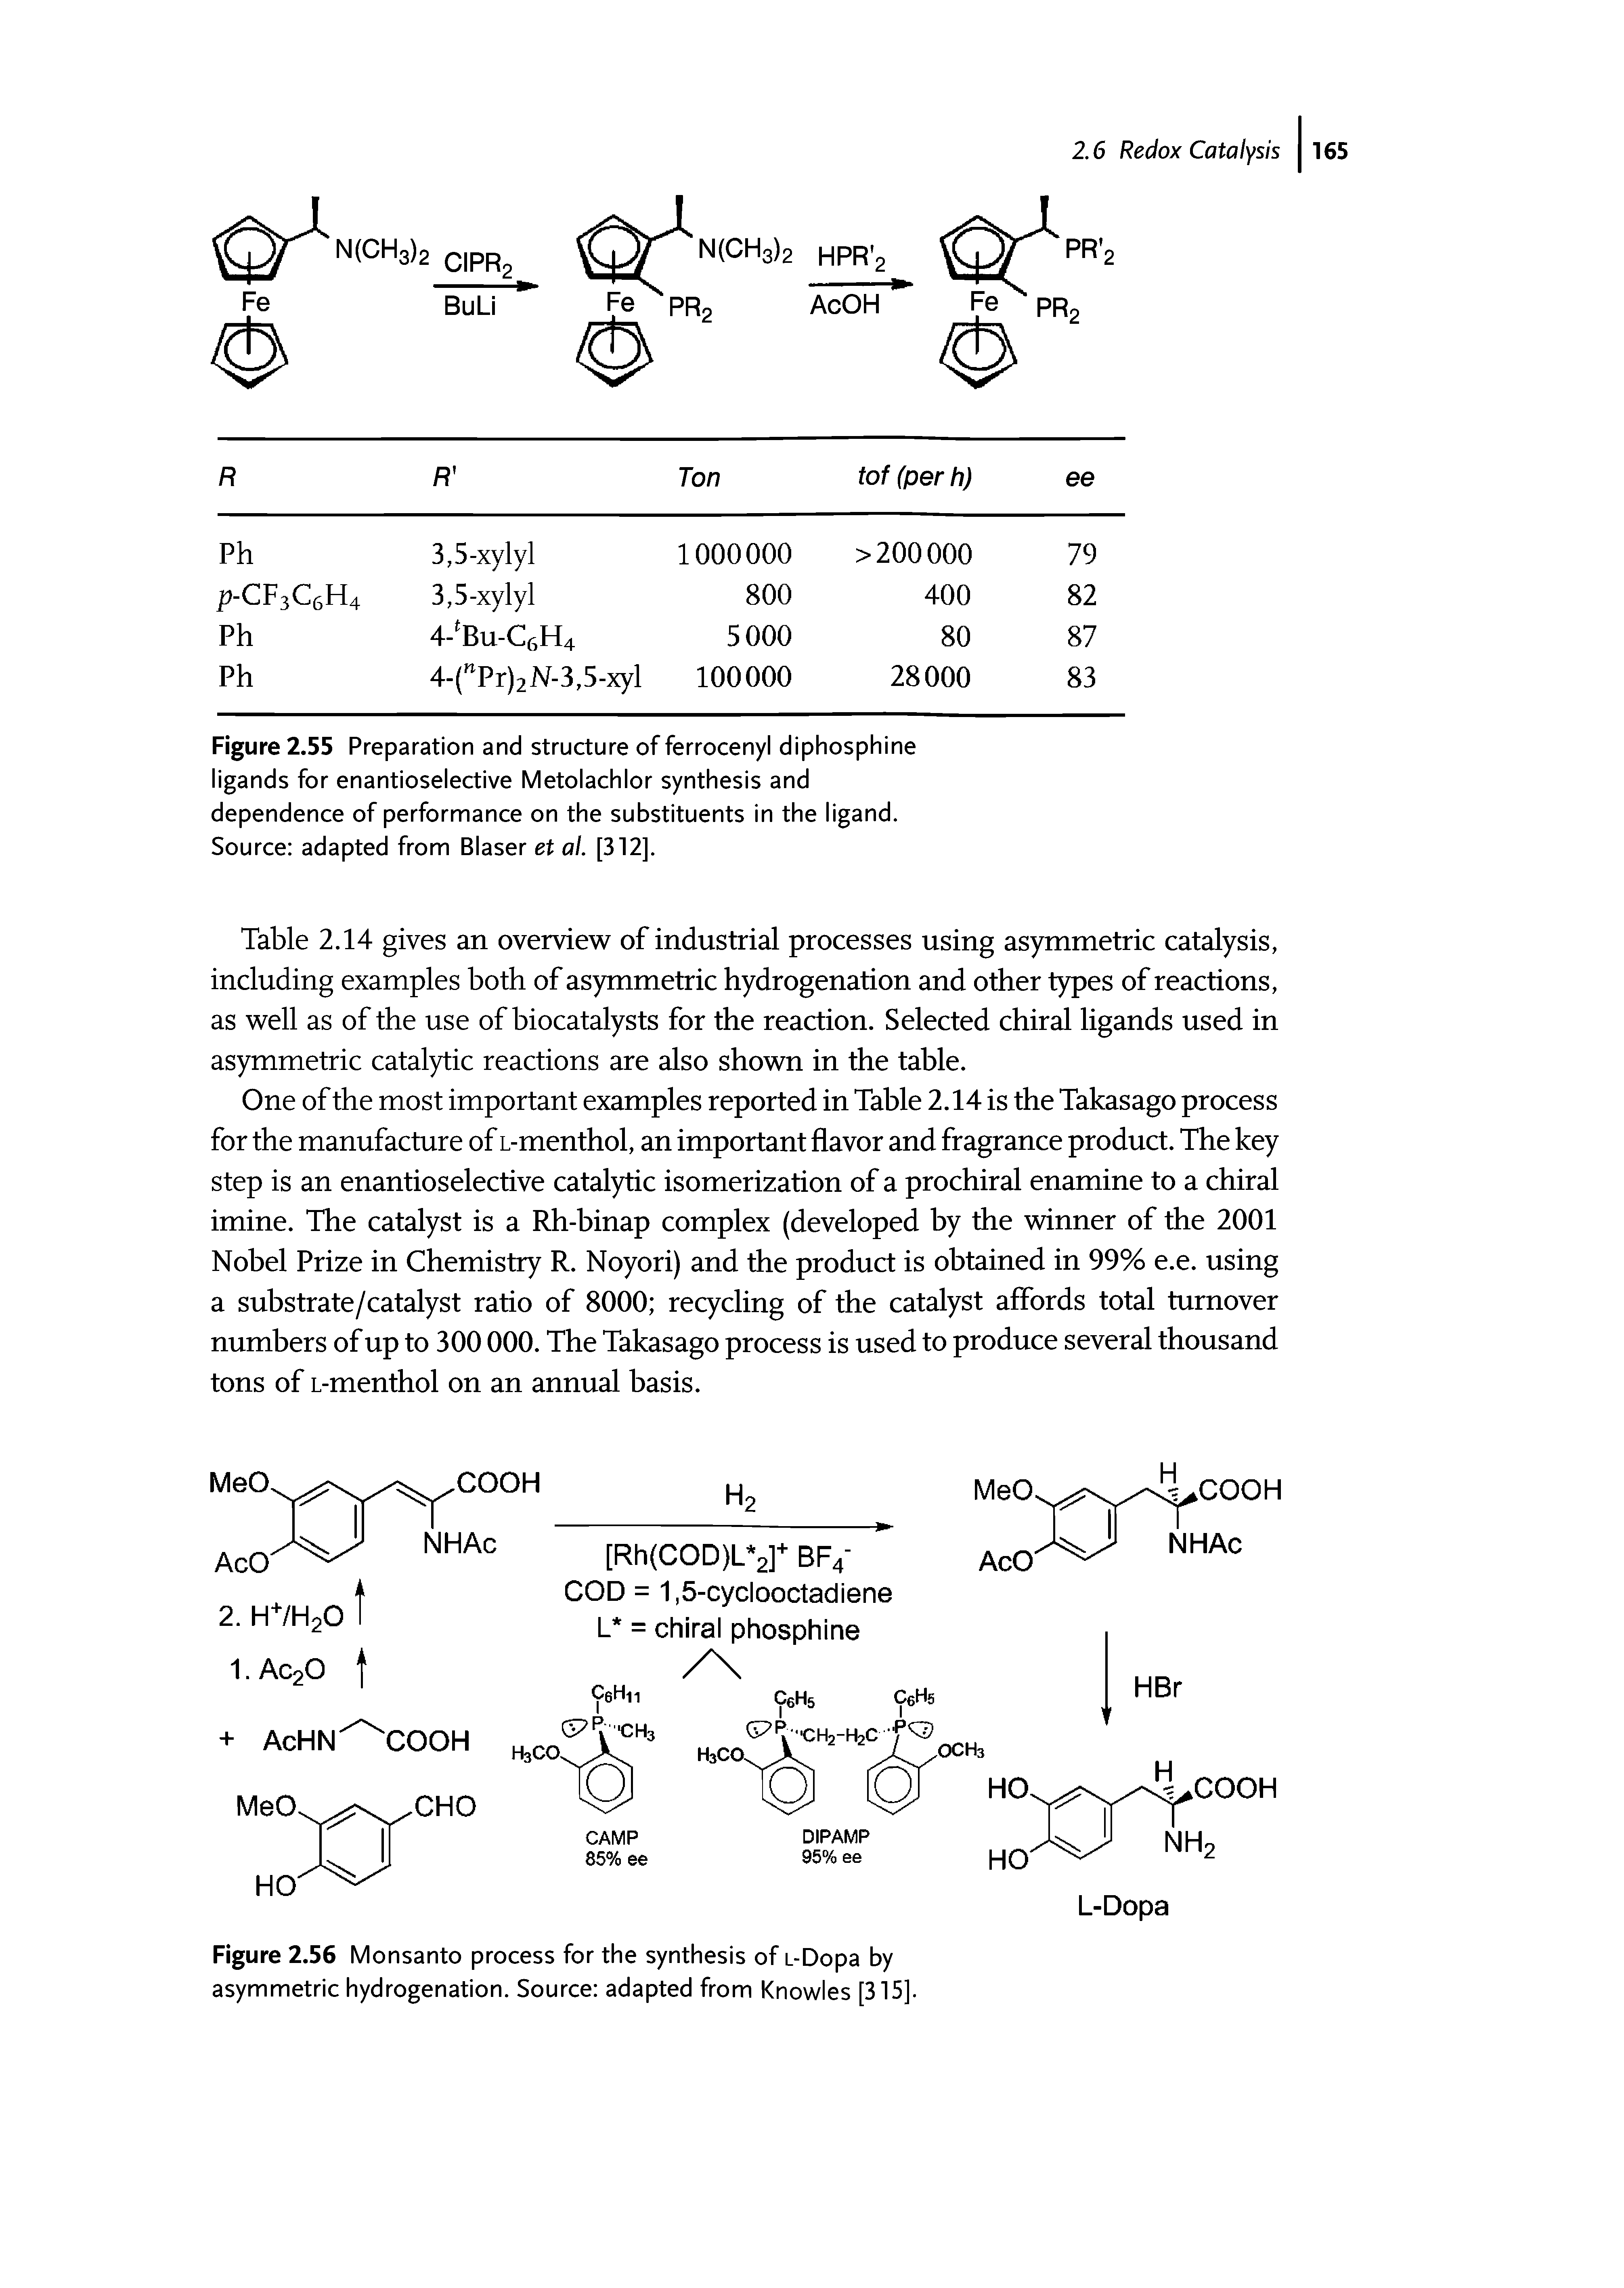 Figure 2.55 Preparation and structure of ferrocenyl diphosphine ligands for enantioselective Metolachlor synthesis and dependence of performance on the substituents in the ligand.